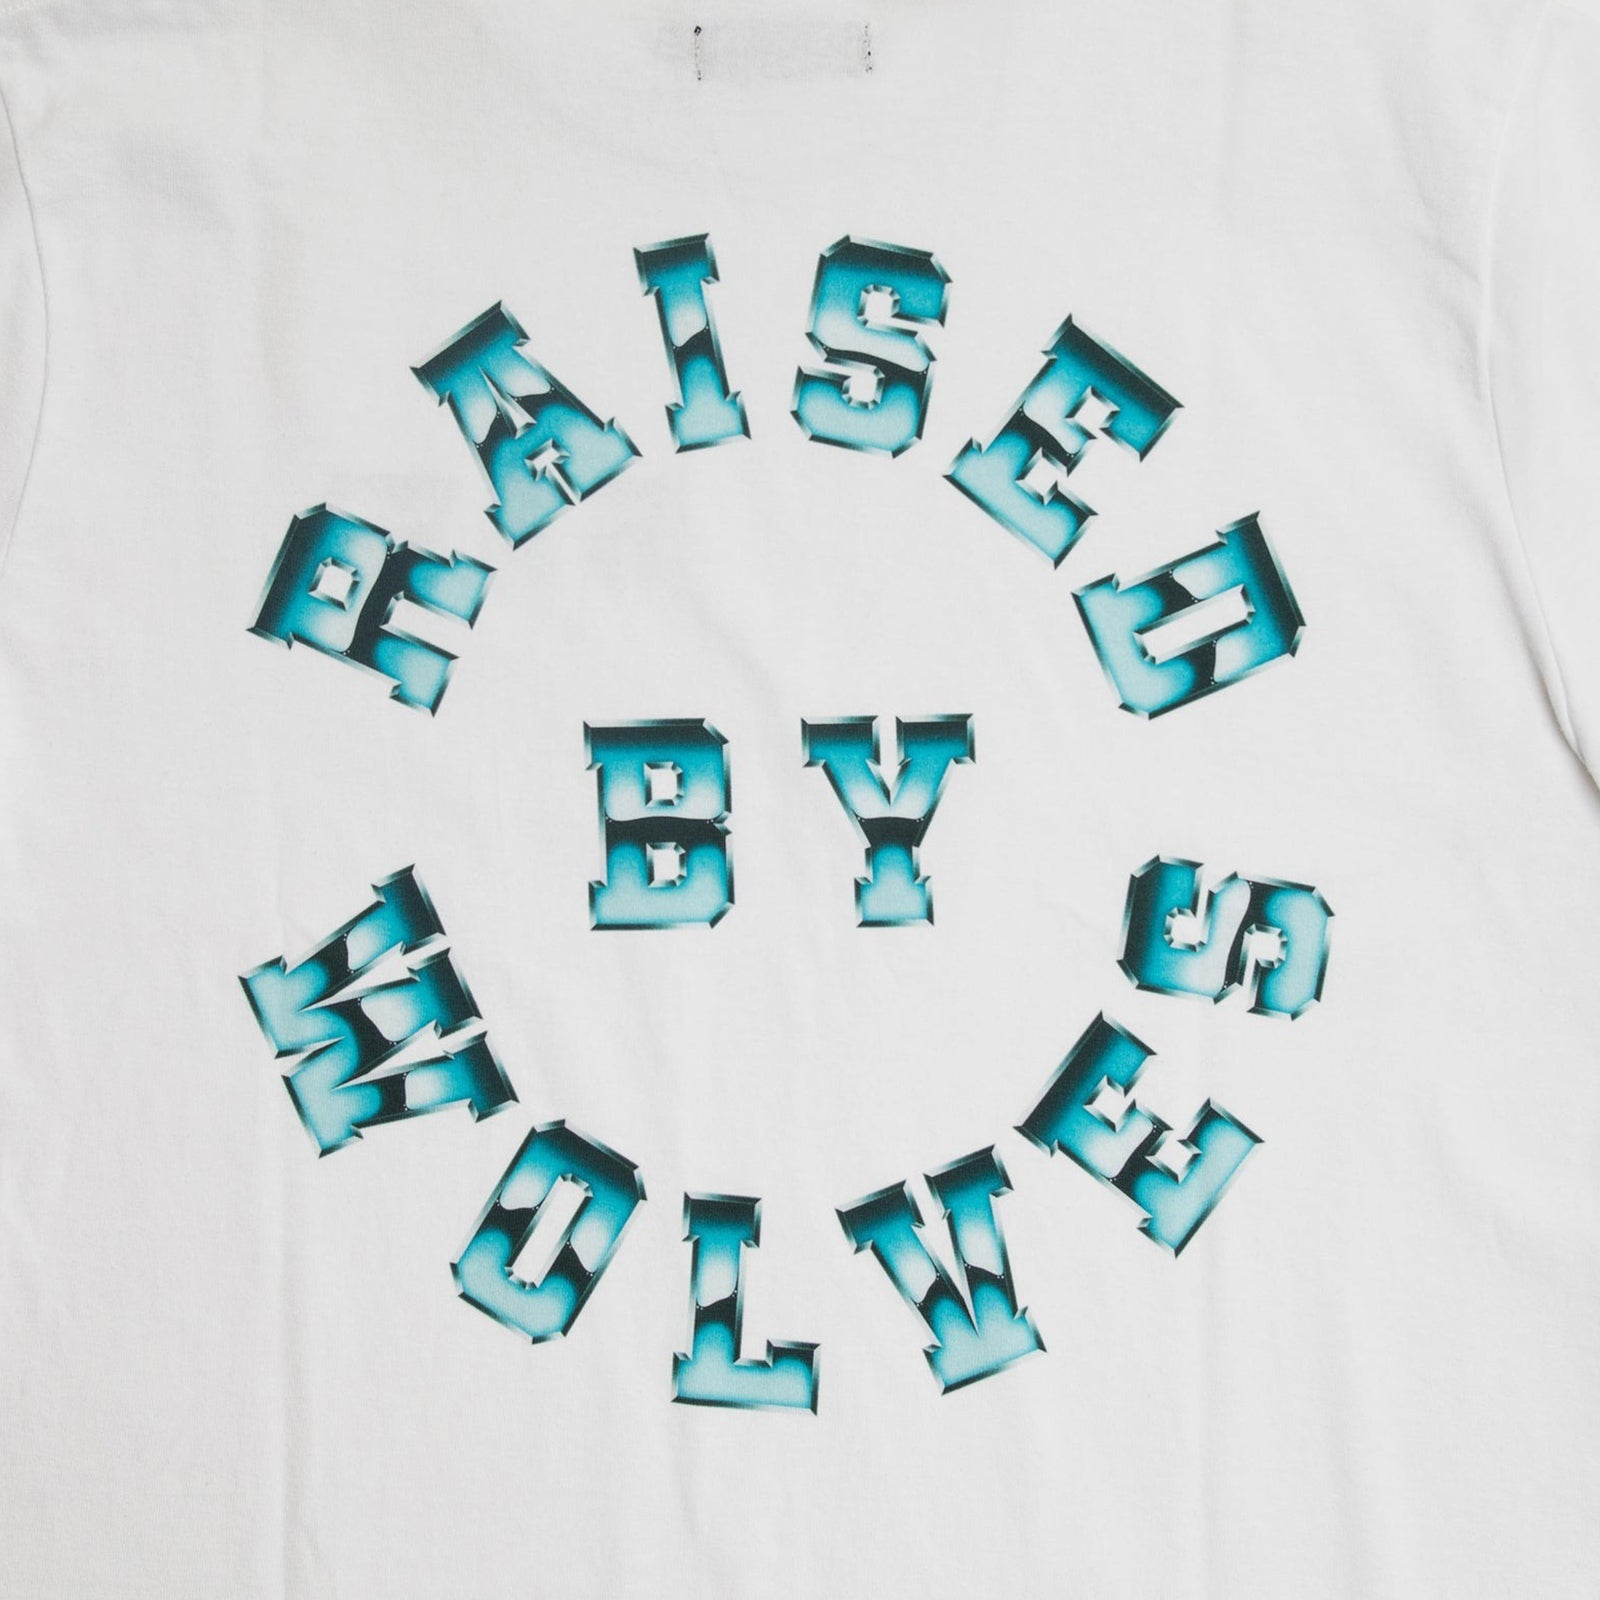 Raised By Wolves Chrome Wheel Tee White - T-SHIRTS - Canada